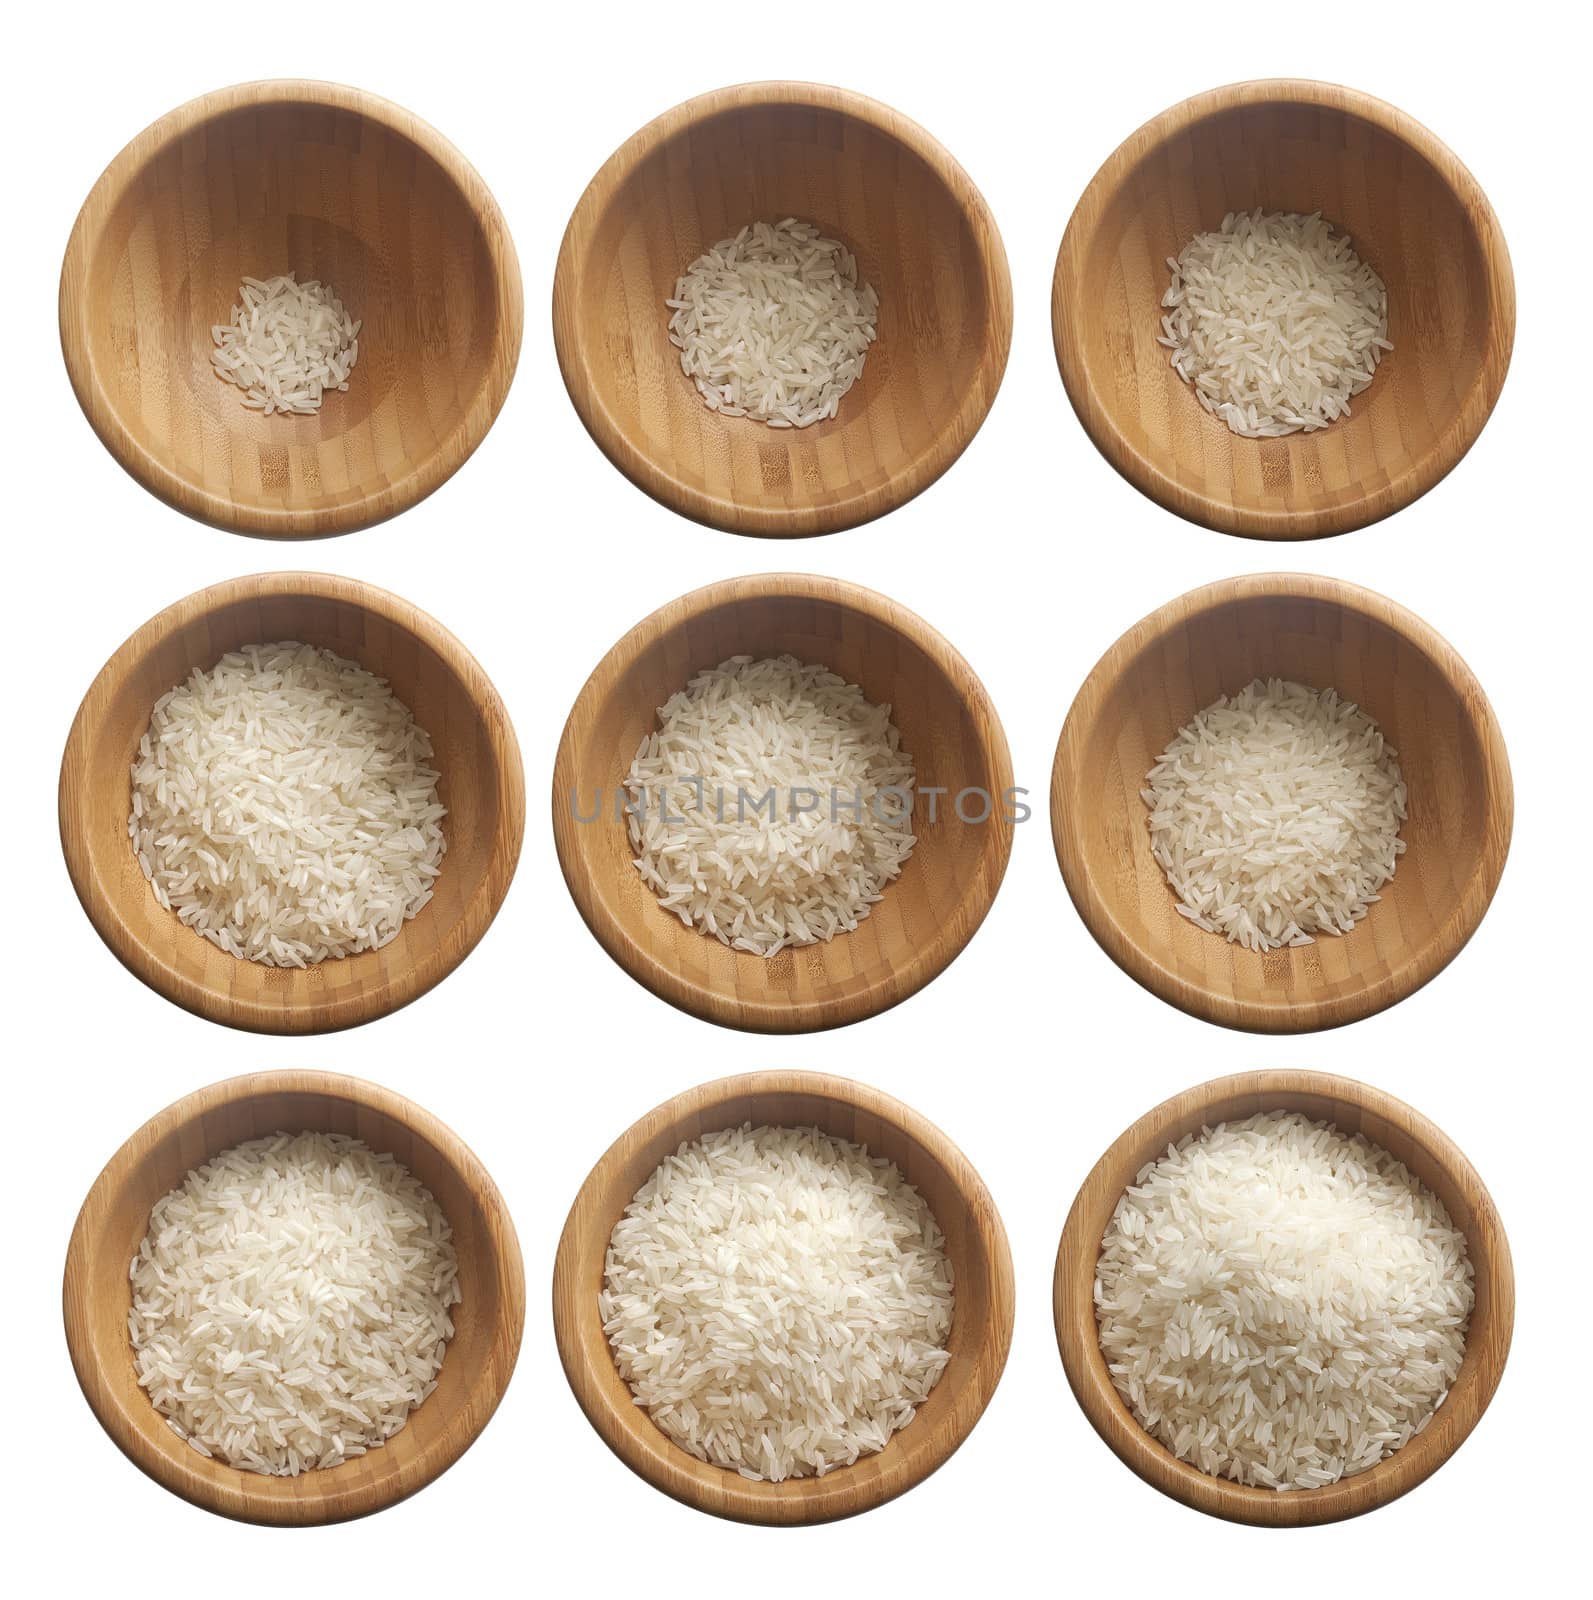 Some variants of wooden bowl with rice